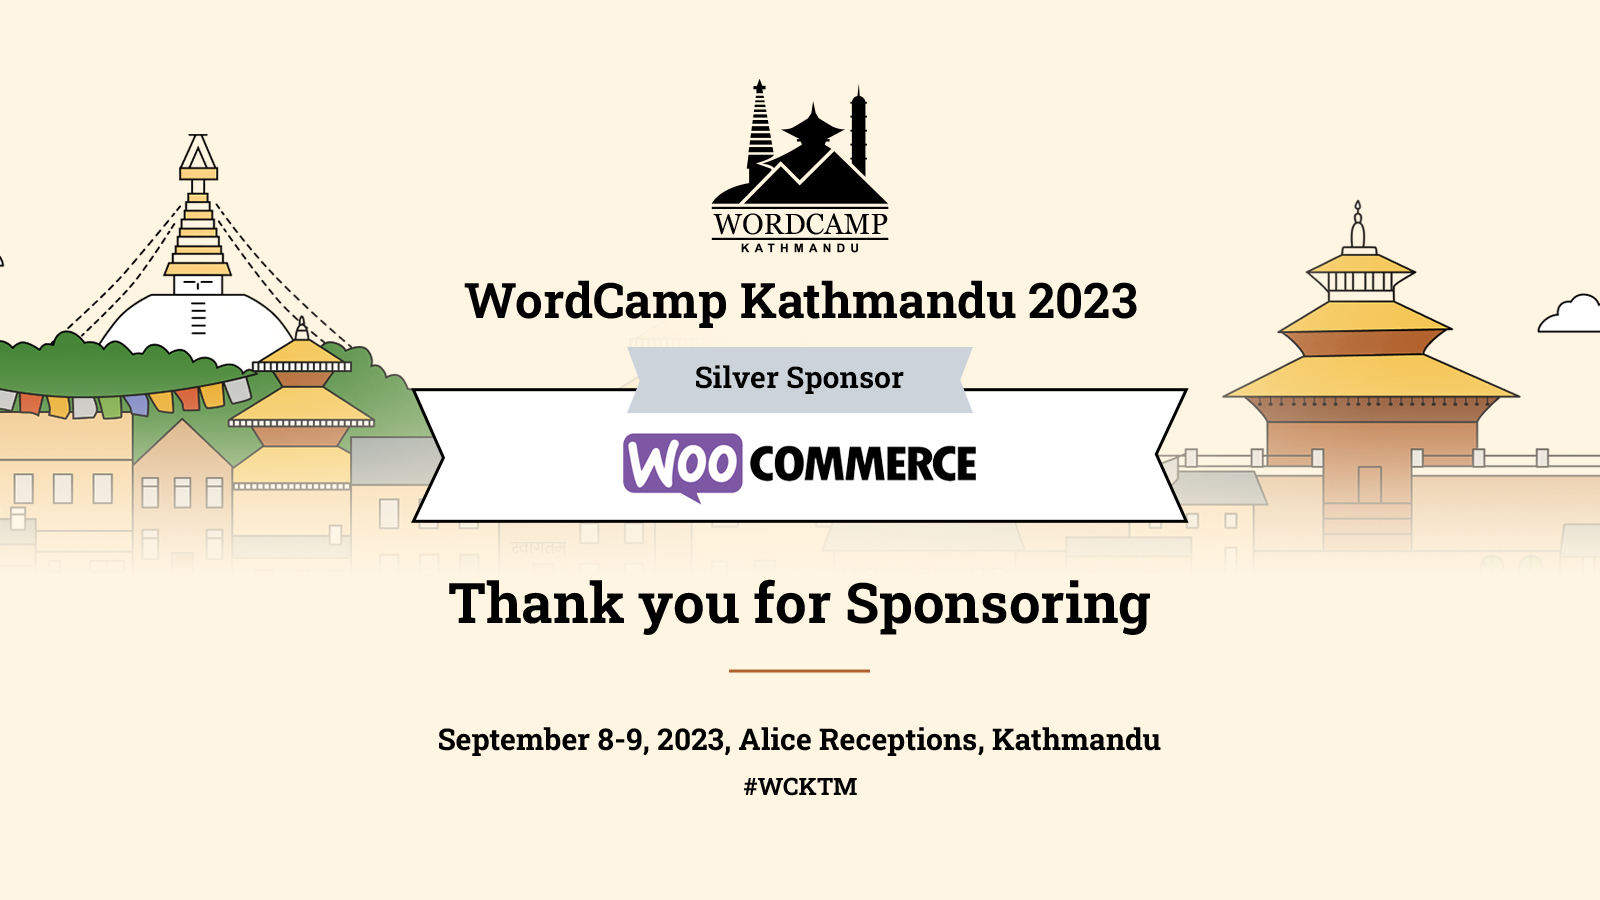 Thank you WooCommerce for sponsoring